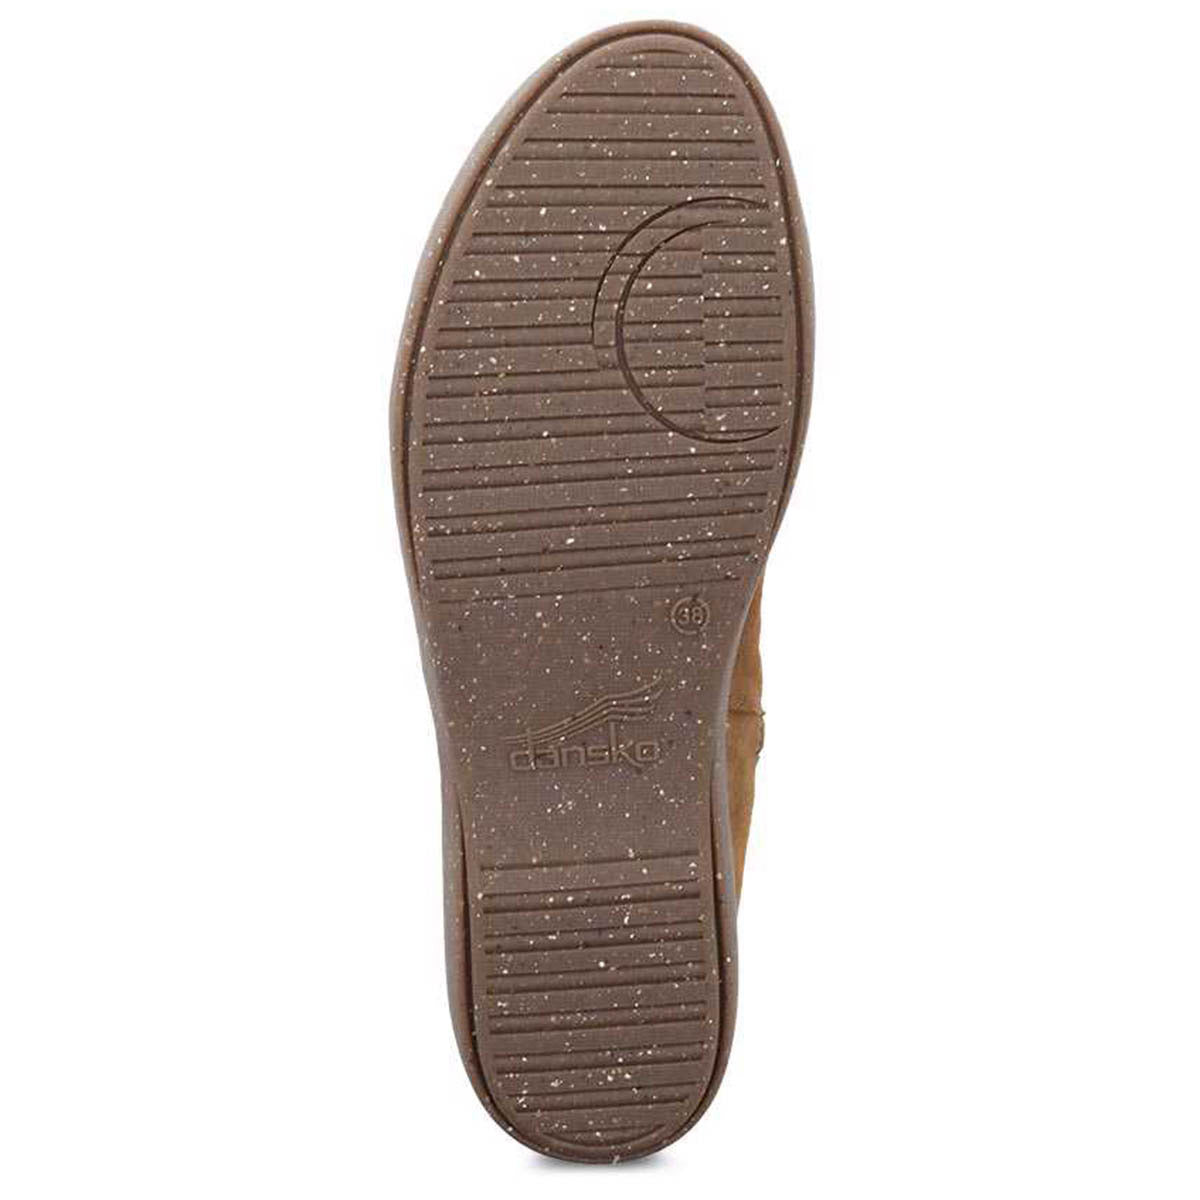 Sole of a shoe with textured tread and Dansko brand name embossed, featuring Dansko Natural Arch technology.